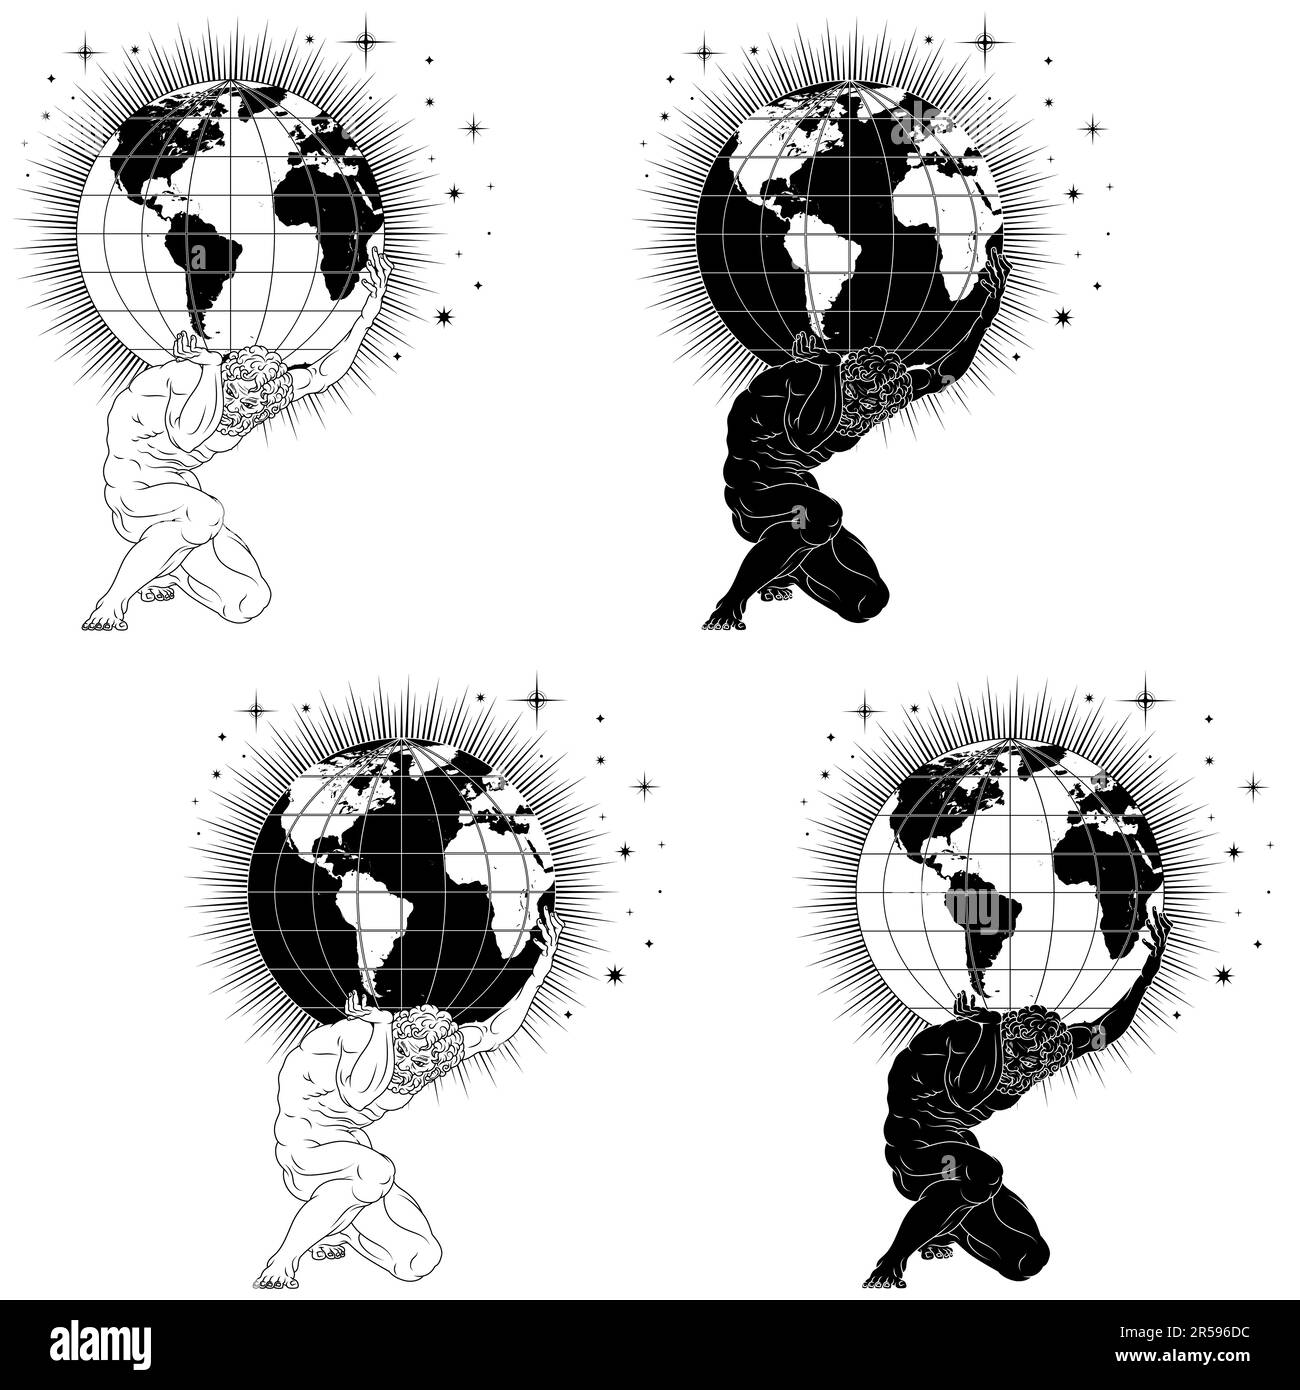 Vector design of titan Atlas holding planet earth on his shoulders, titan from greek mythology holding earth sphere with starry background Stock Vector